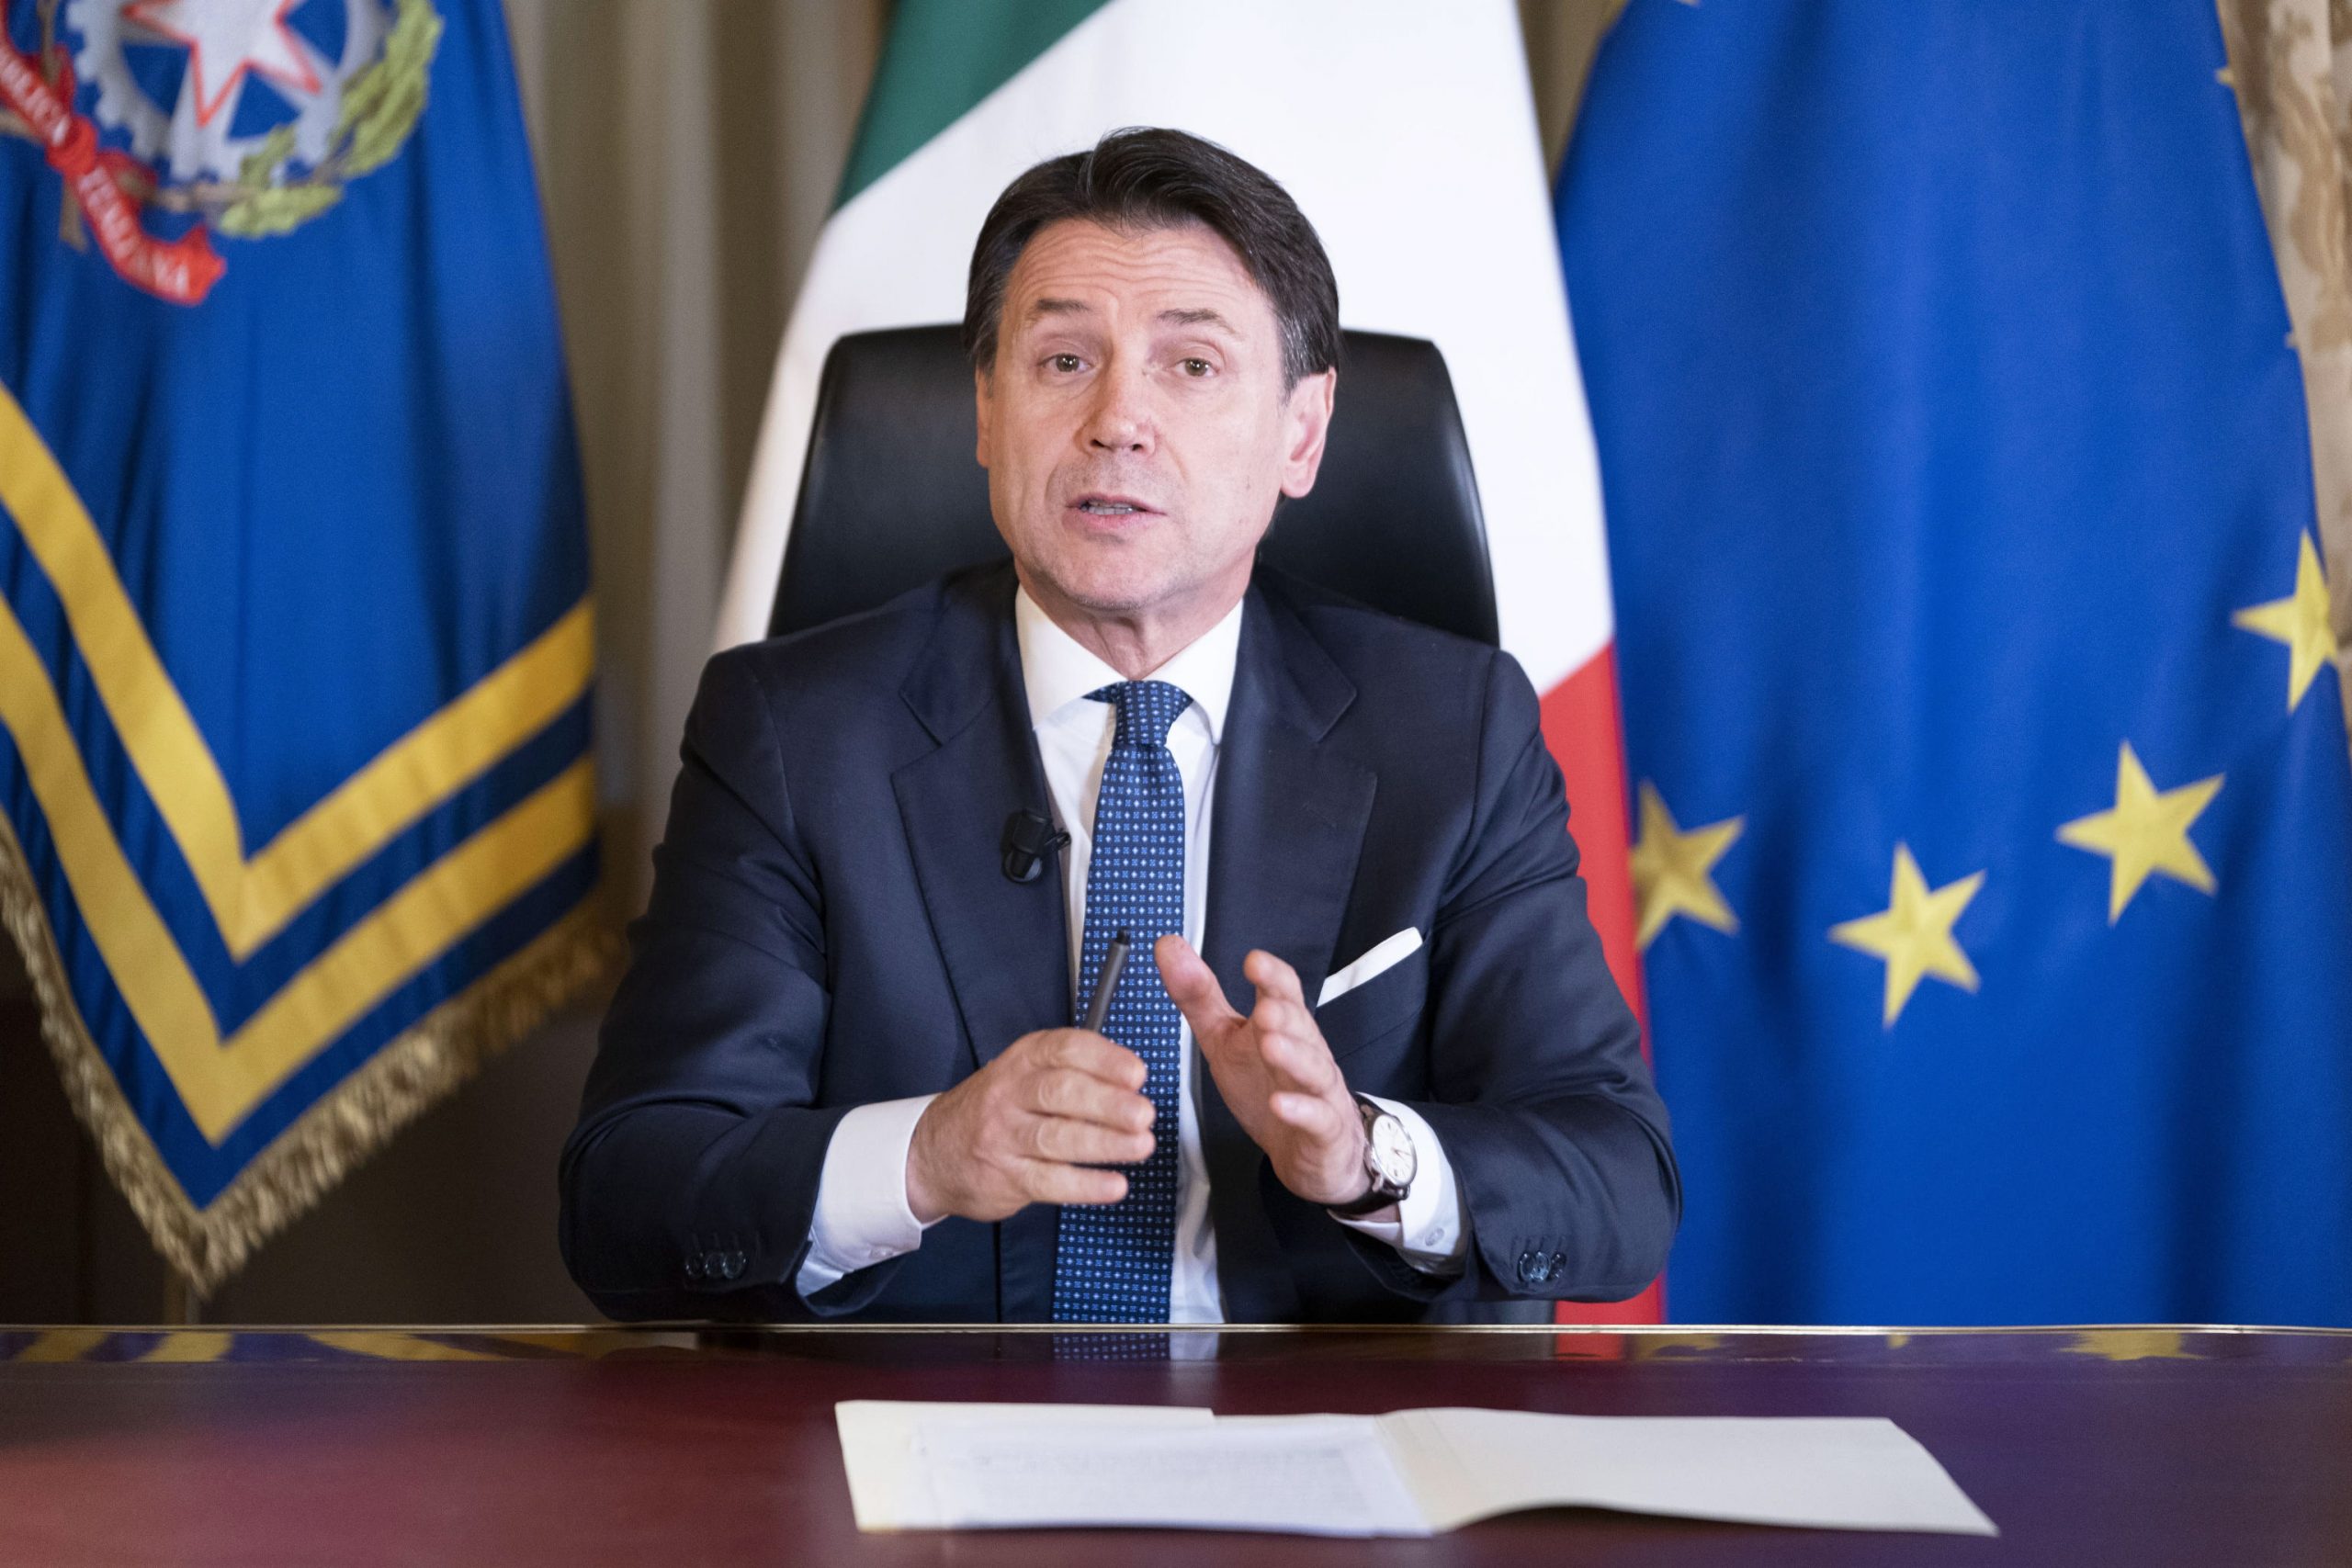 epa08287484 A handout photo made available by the Chigi Palace Press Office shows Italian Prime Minister Giuseppe Conte delivers his speech for the declarations on the new restrictions to contrast the spread of Coronavirus Covid-19 desease , at Chigi Palace in Rome, Italy, 11 March 2020.  EPA/FILIPPO ATTILI/CHIGI PALACE / HANDOUT  HANDOUT EDITORIAL USE ONLY/NO SALES